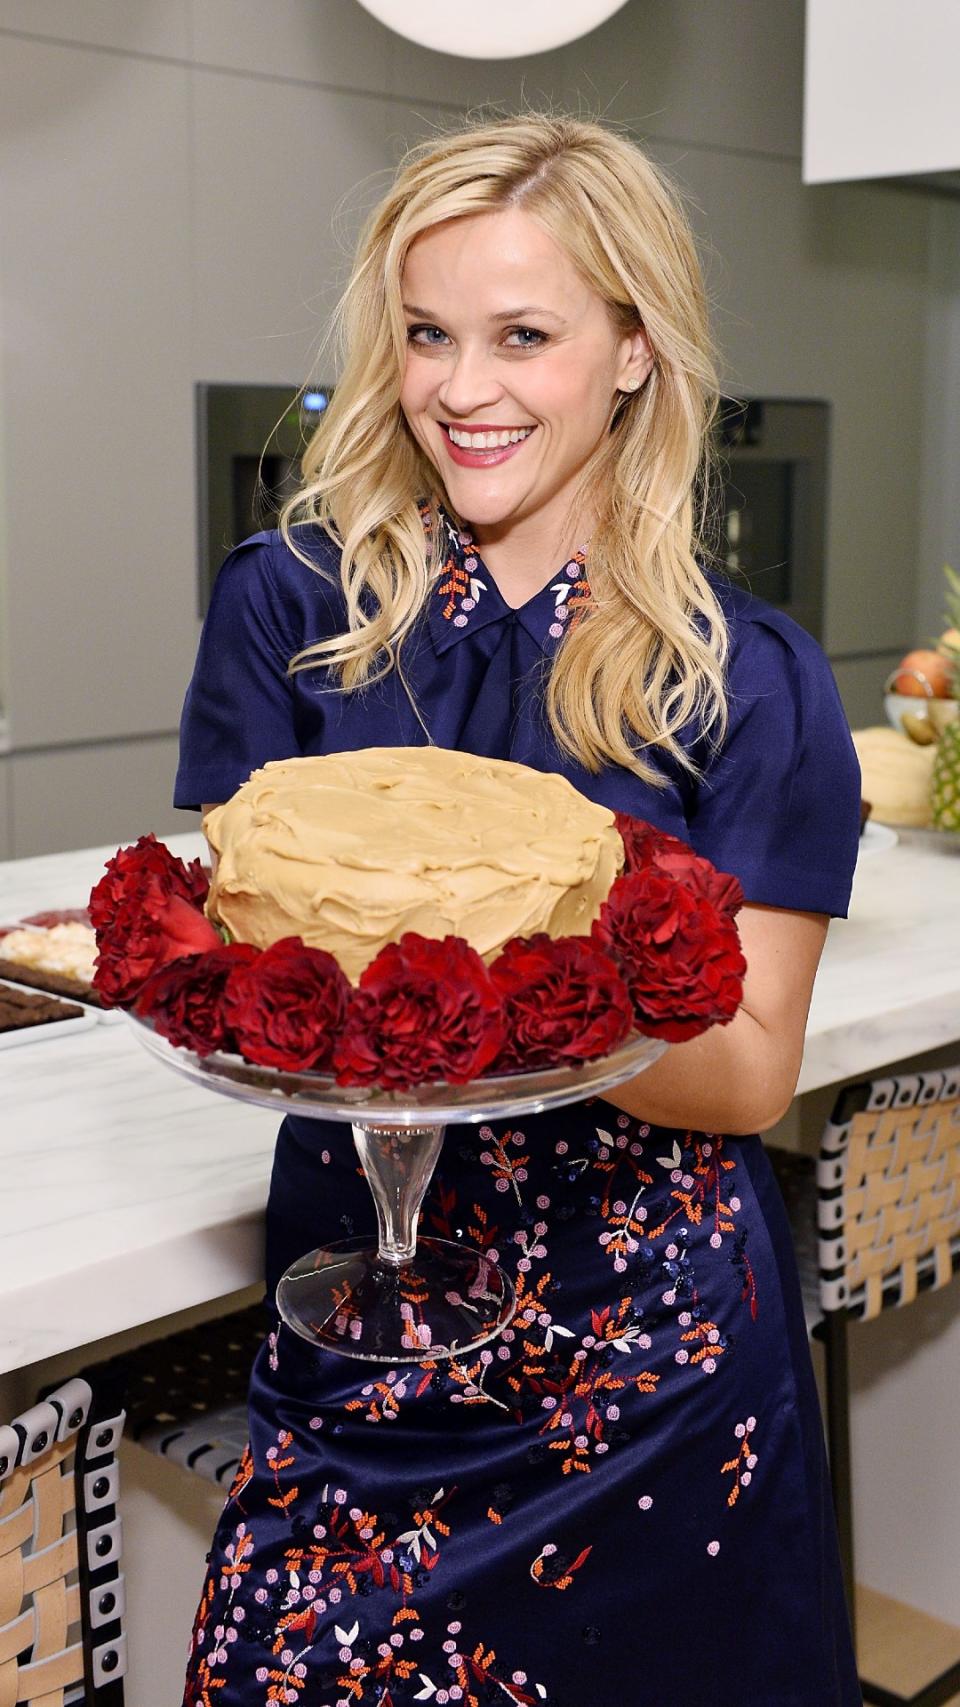 Reese Witherspoon with a cake